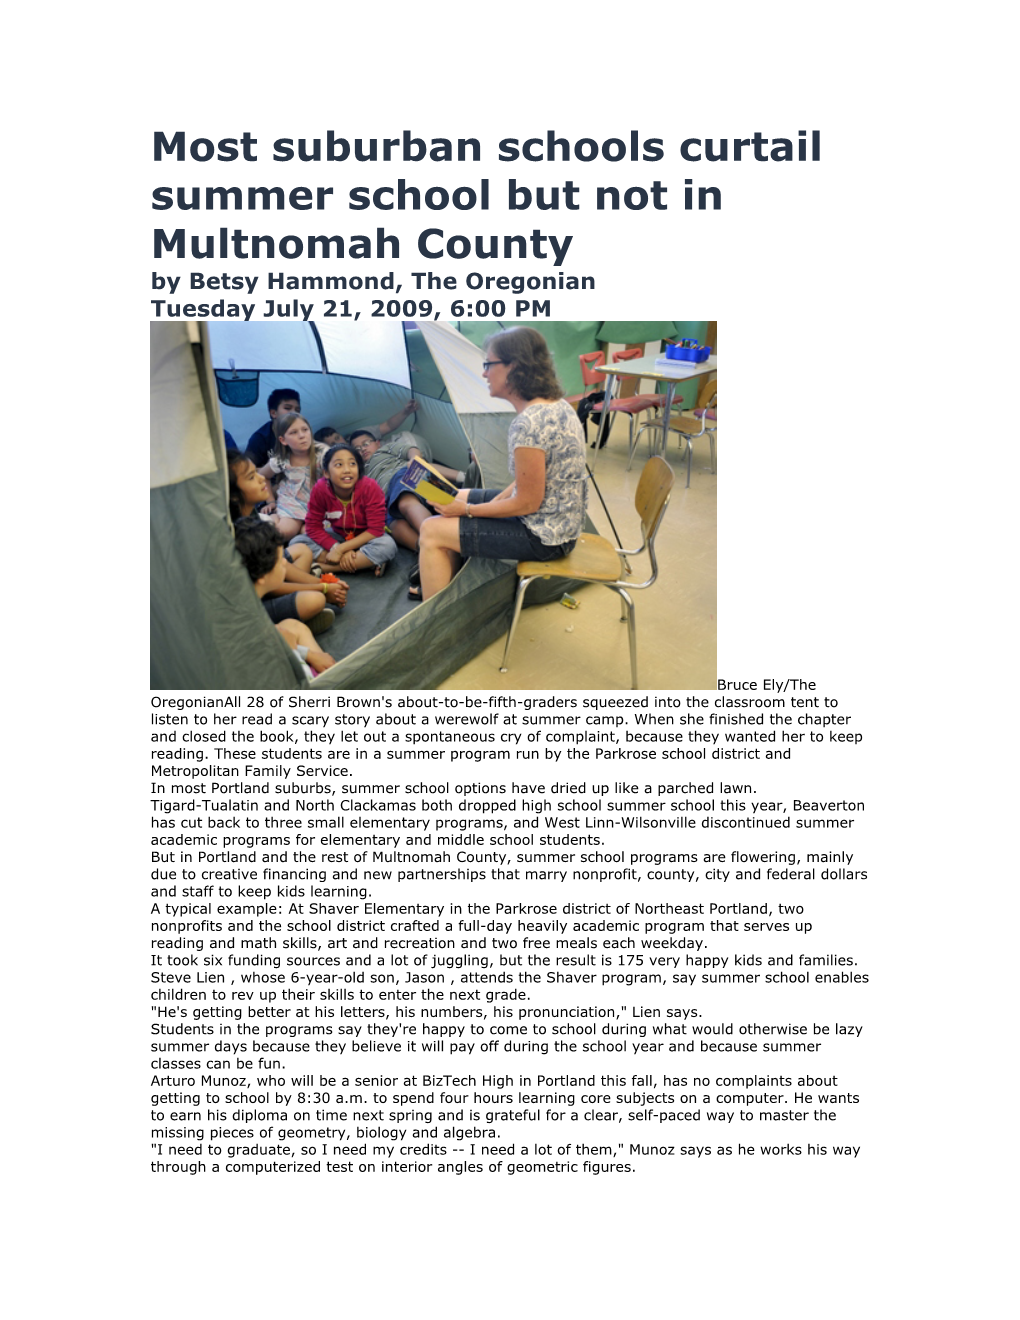 Most Suburban Schools Curtail Summer School but Not in Multnomah County by Betsy Hammond, the Oregonian Tuesday July 21, 2009, 6:00 PM